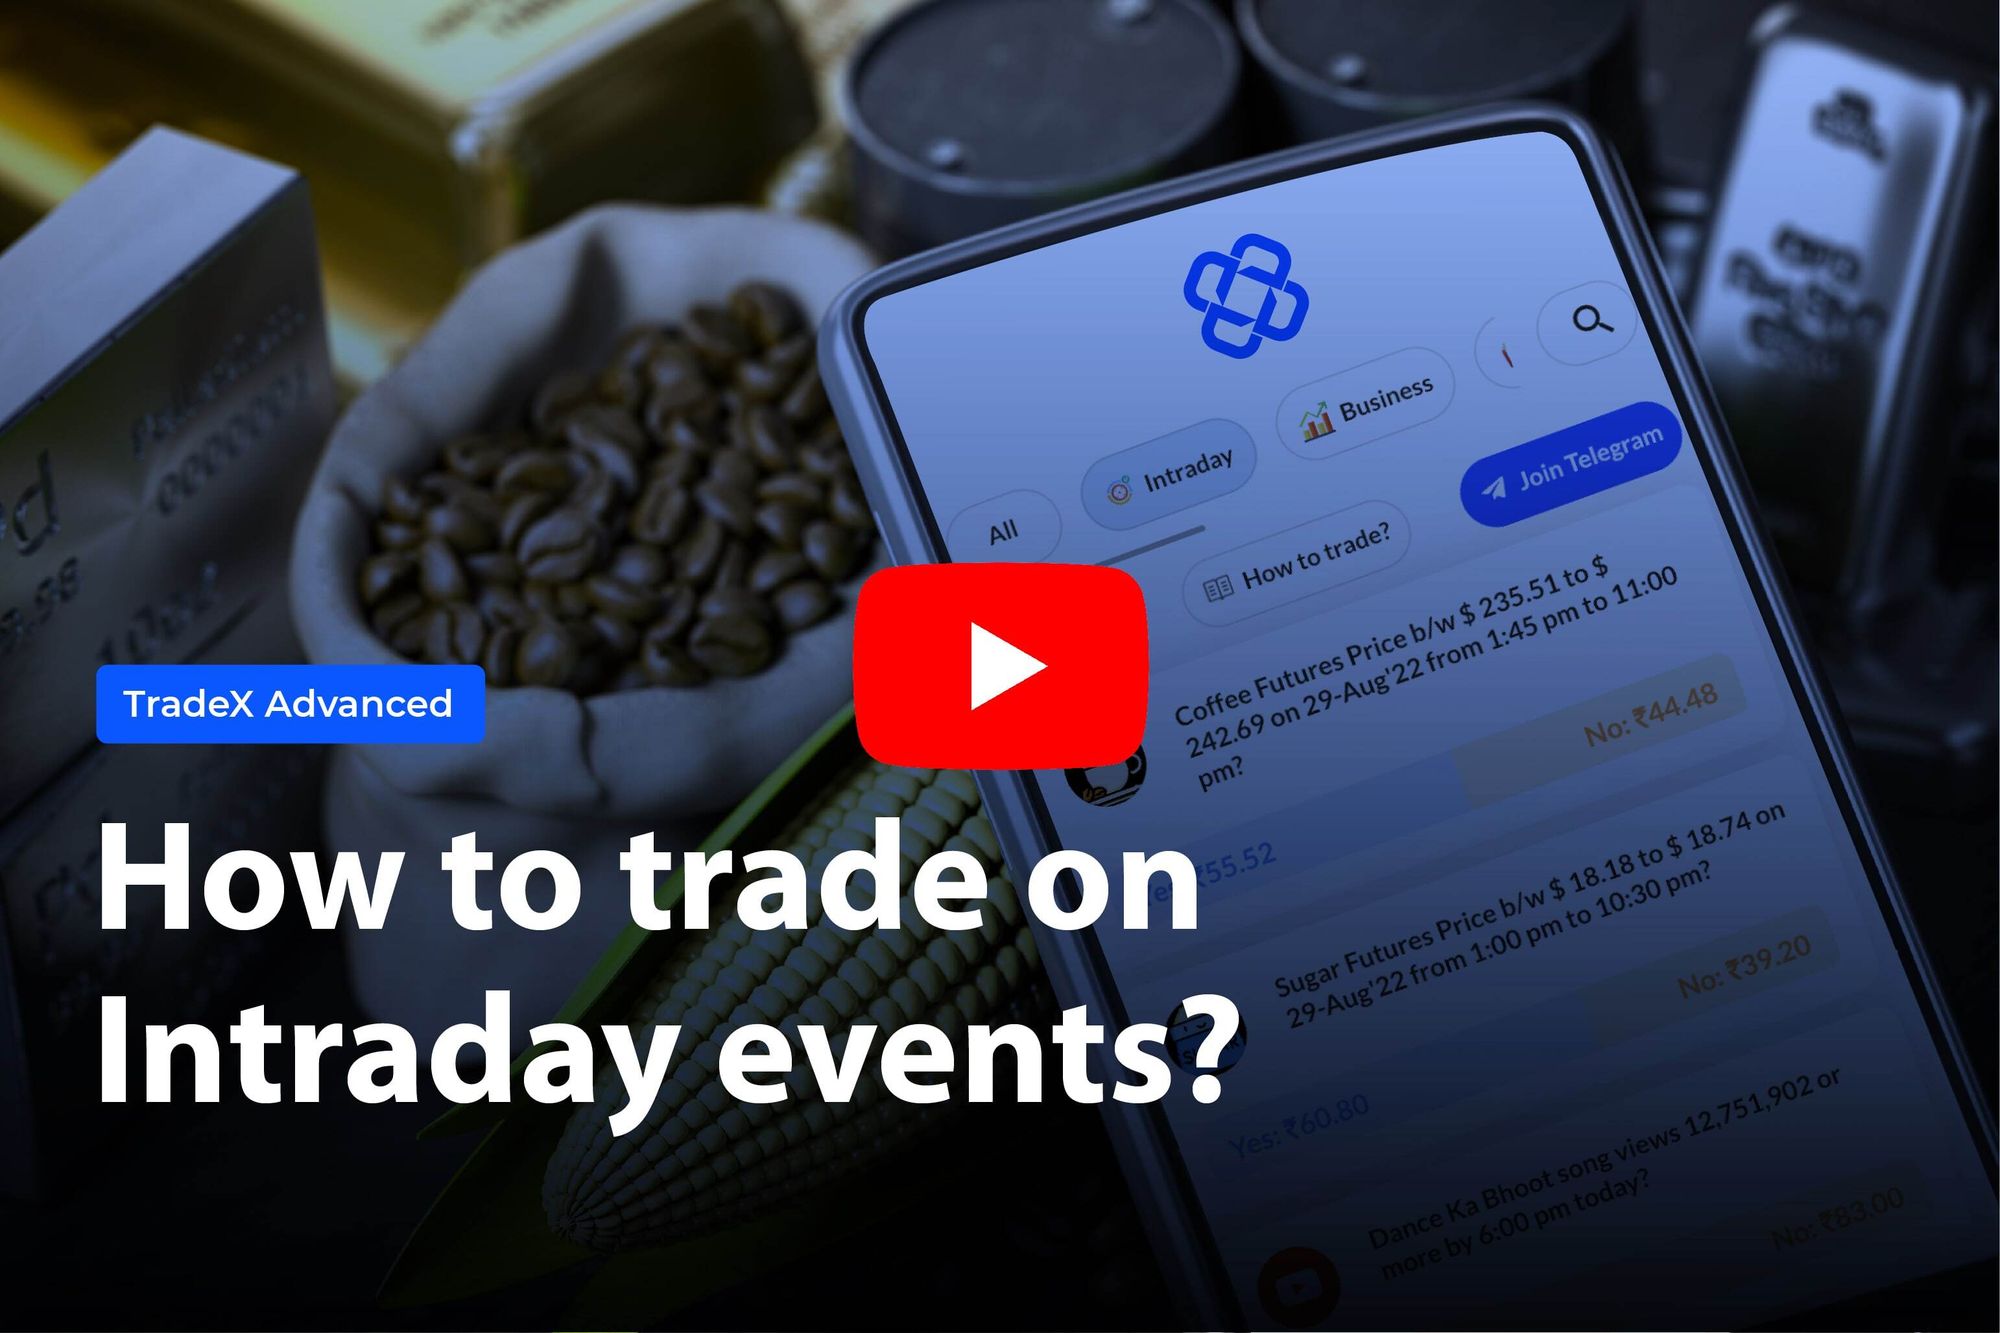 How to trade on Intraday events?